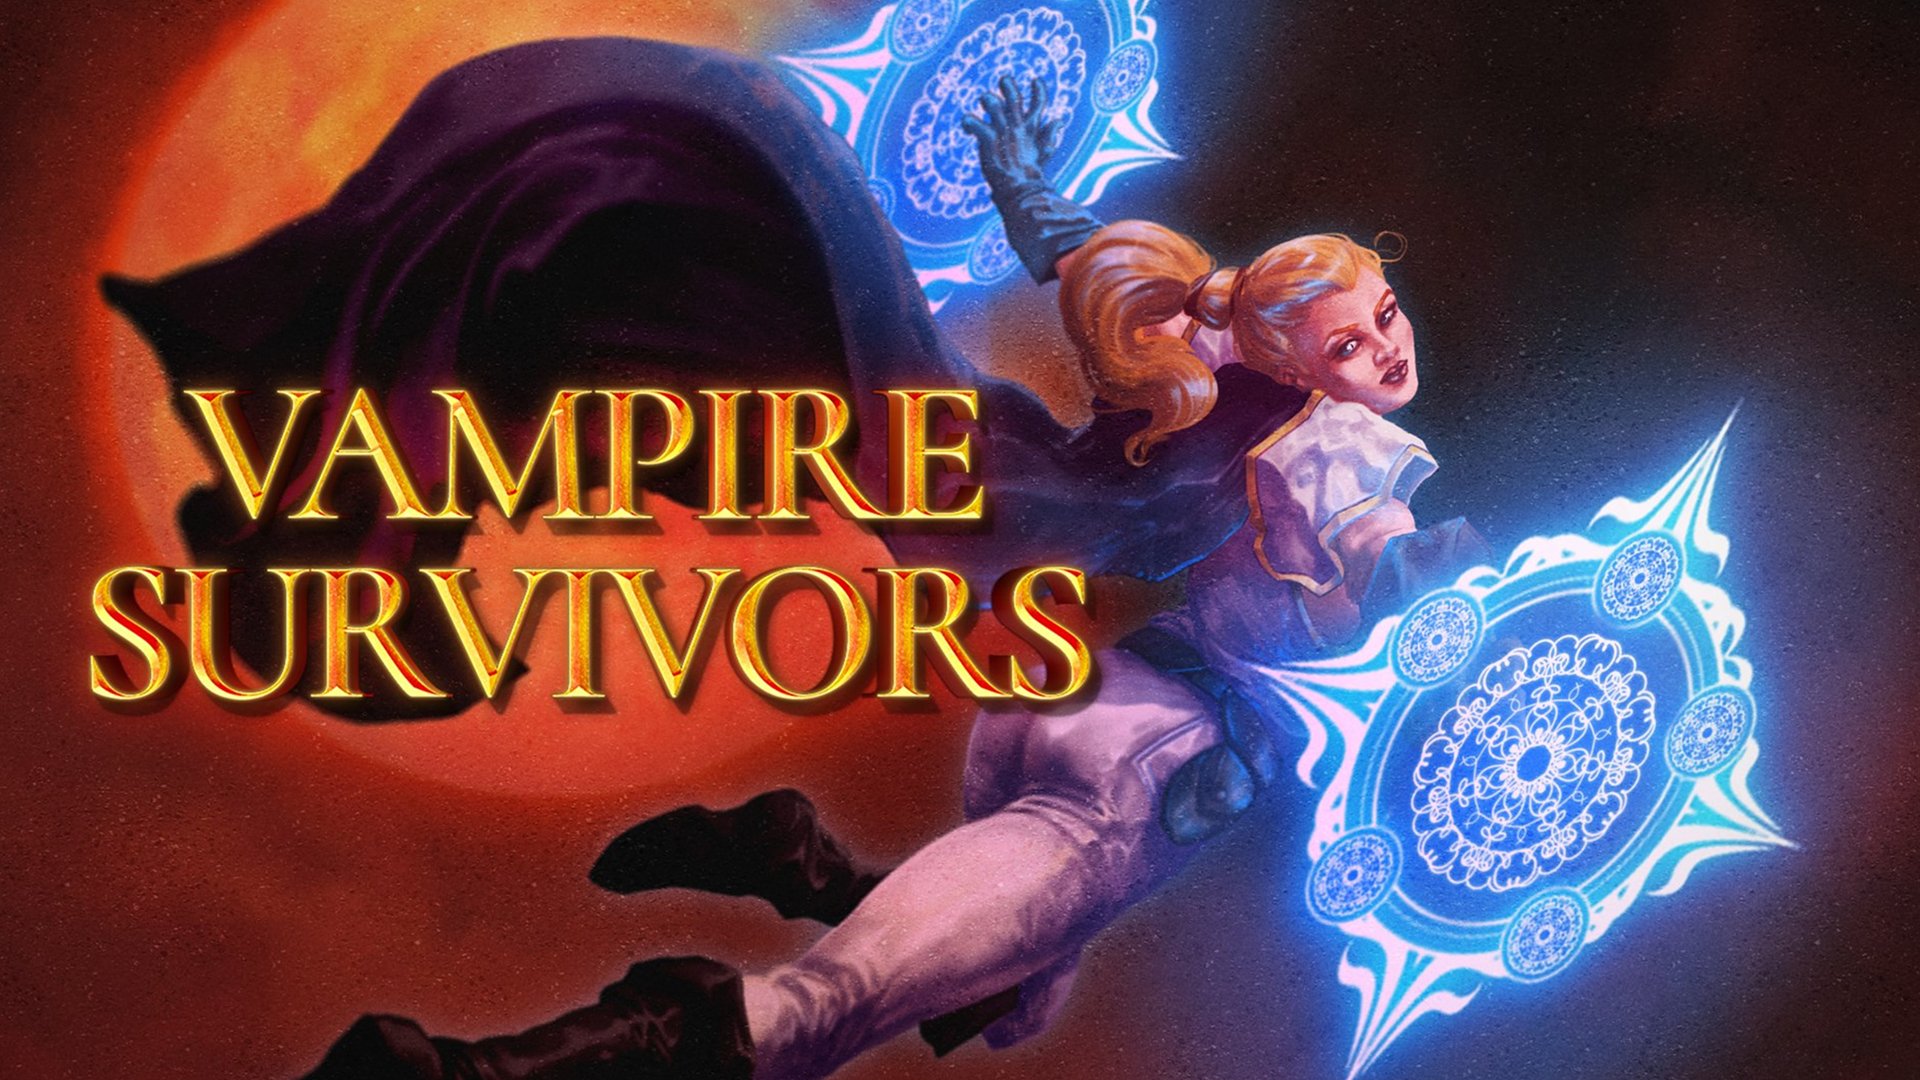 Vampire Survivors is coming to Xbox this month and it will be on